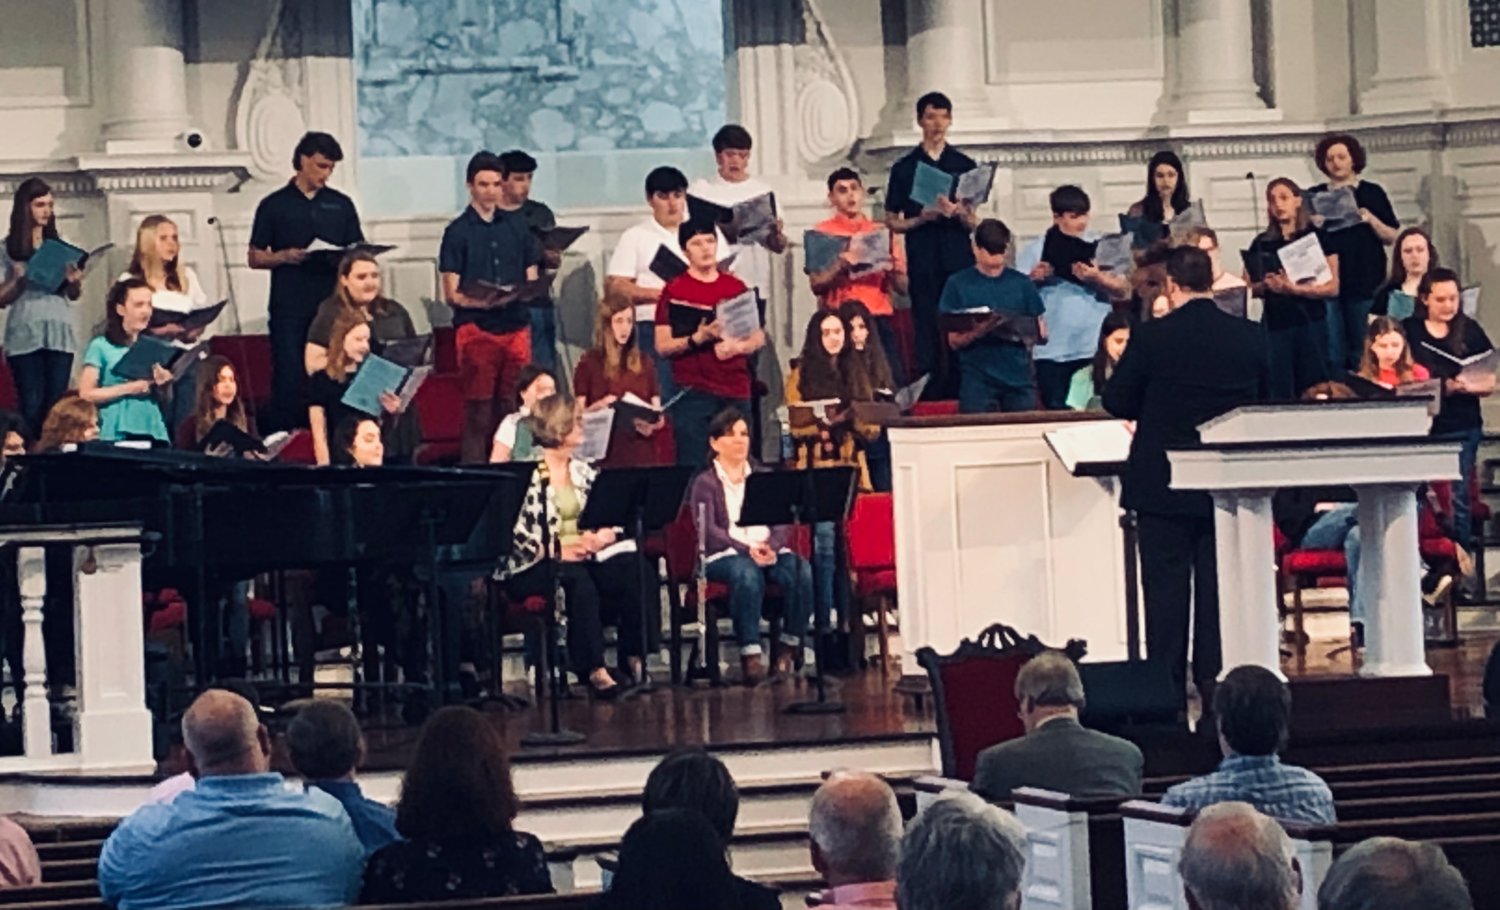 The student choir performs at First Baptist Church in Newman, Georgia. The choir plays an integral part in the life of the congregation.